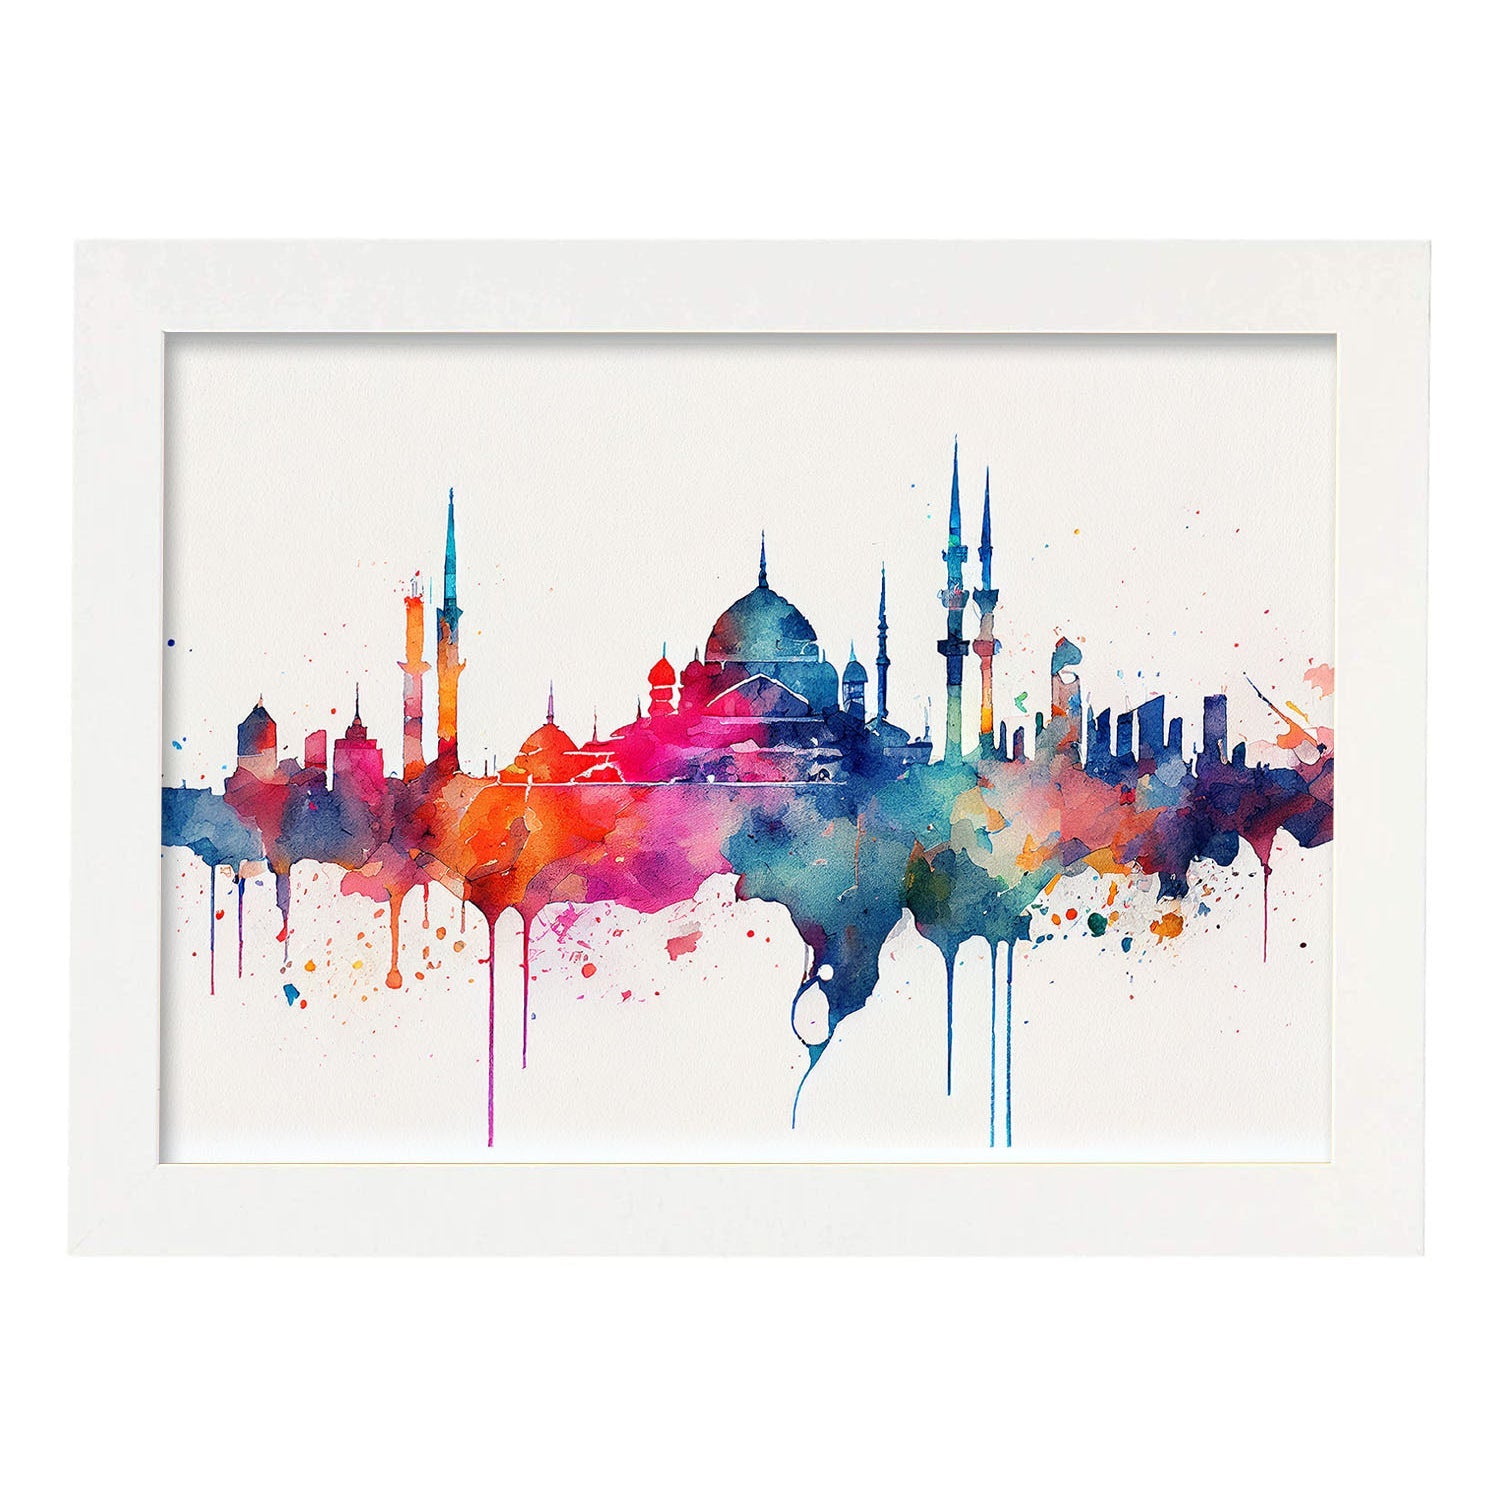 Nacnic watercolor of a skyline of the city of Istanbul_2. Aesthetic Wall Art Prints for Bedroom or Living Room Design.-Artwork-Nacnic-A4-Marco Blanco-Nacnic Estudio SL